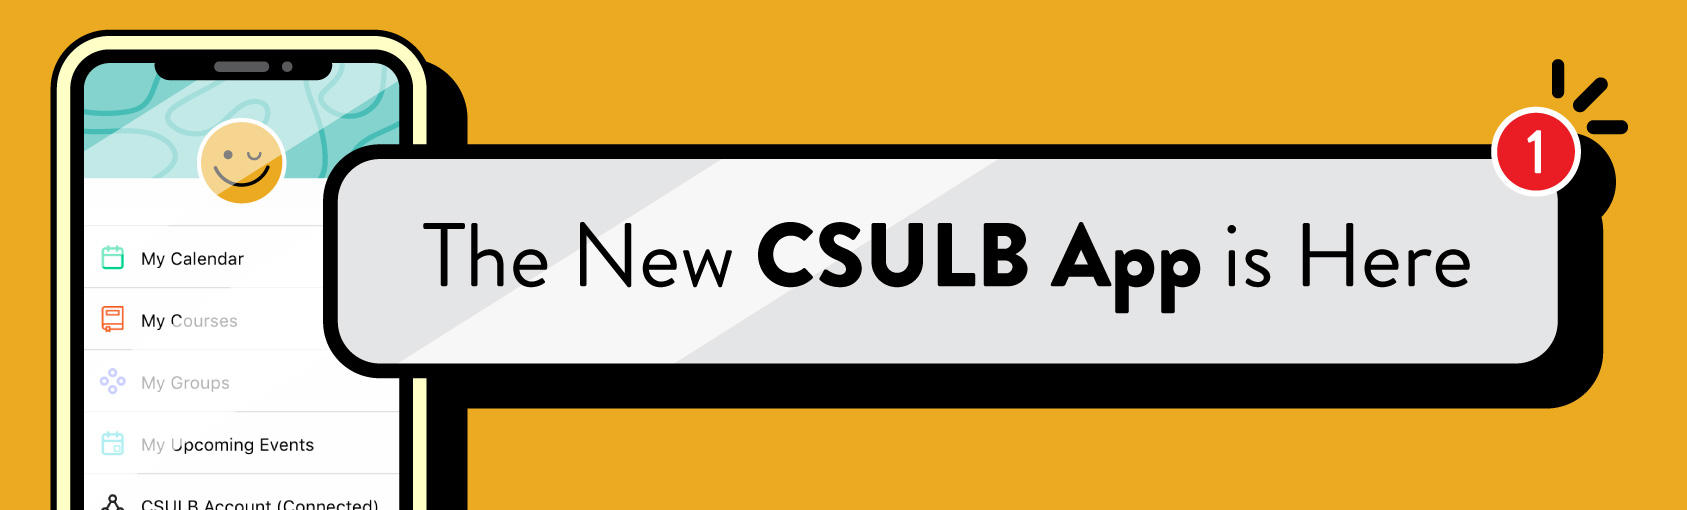 New CSULB App is Here